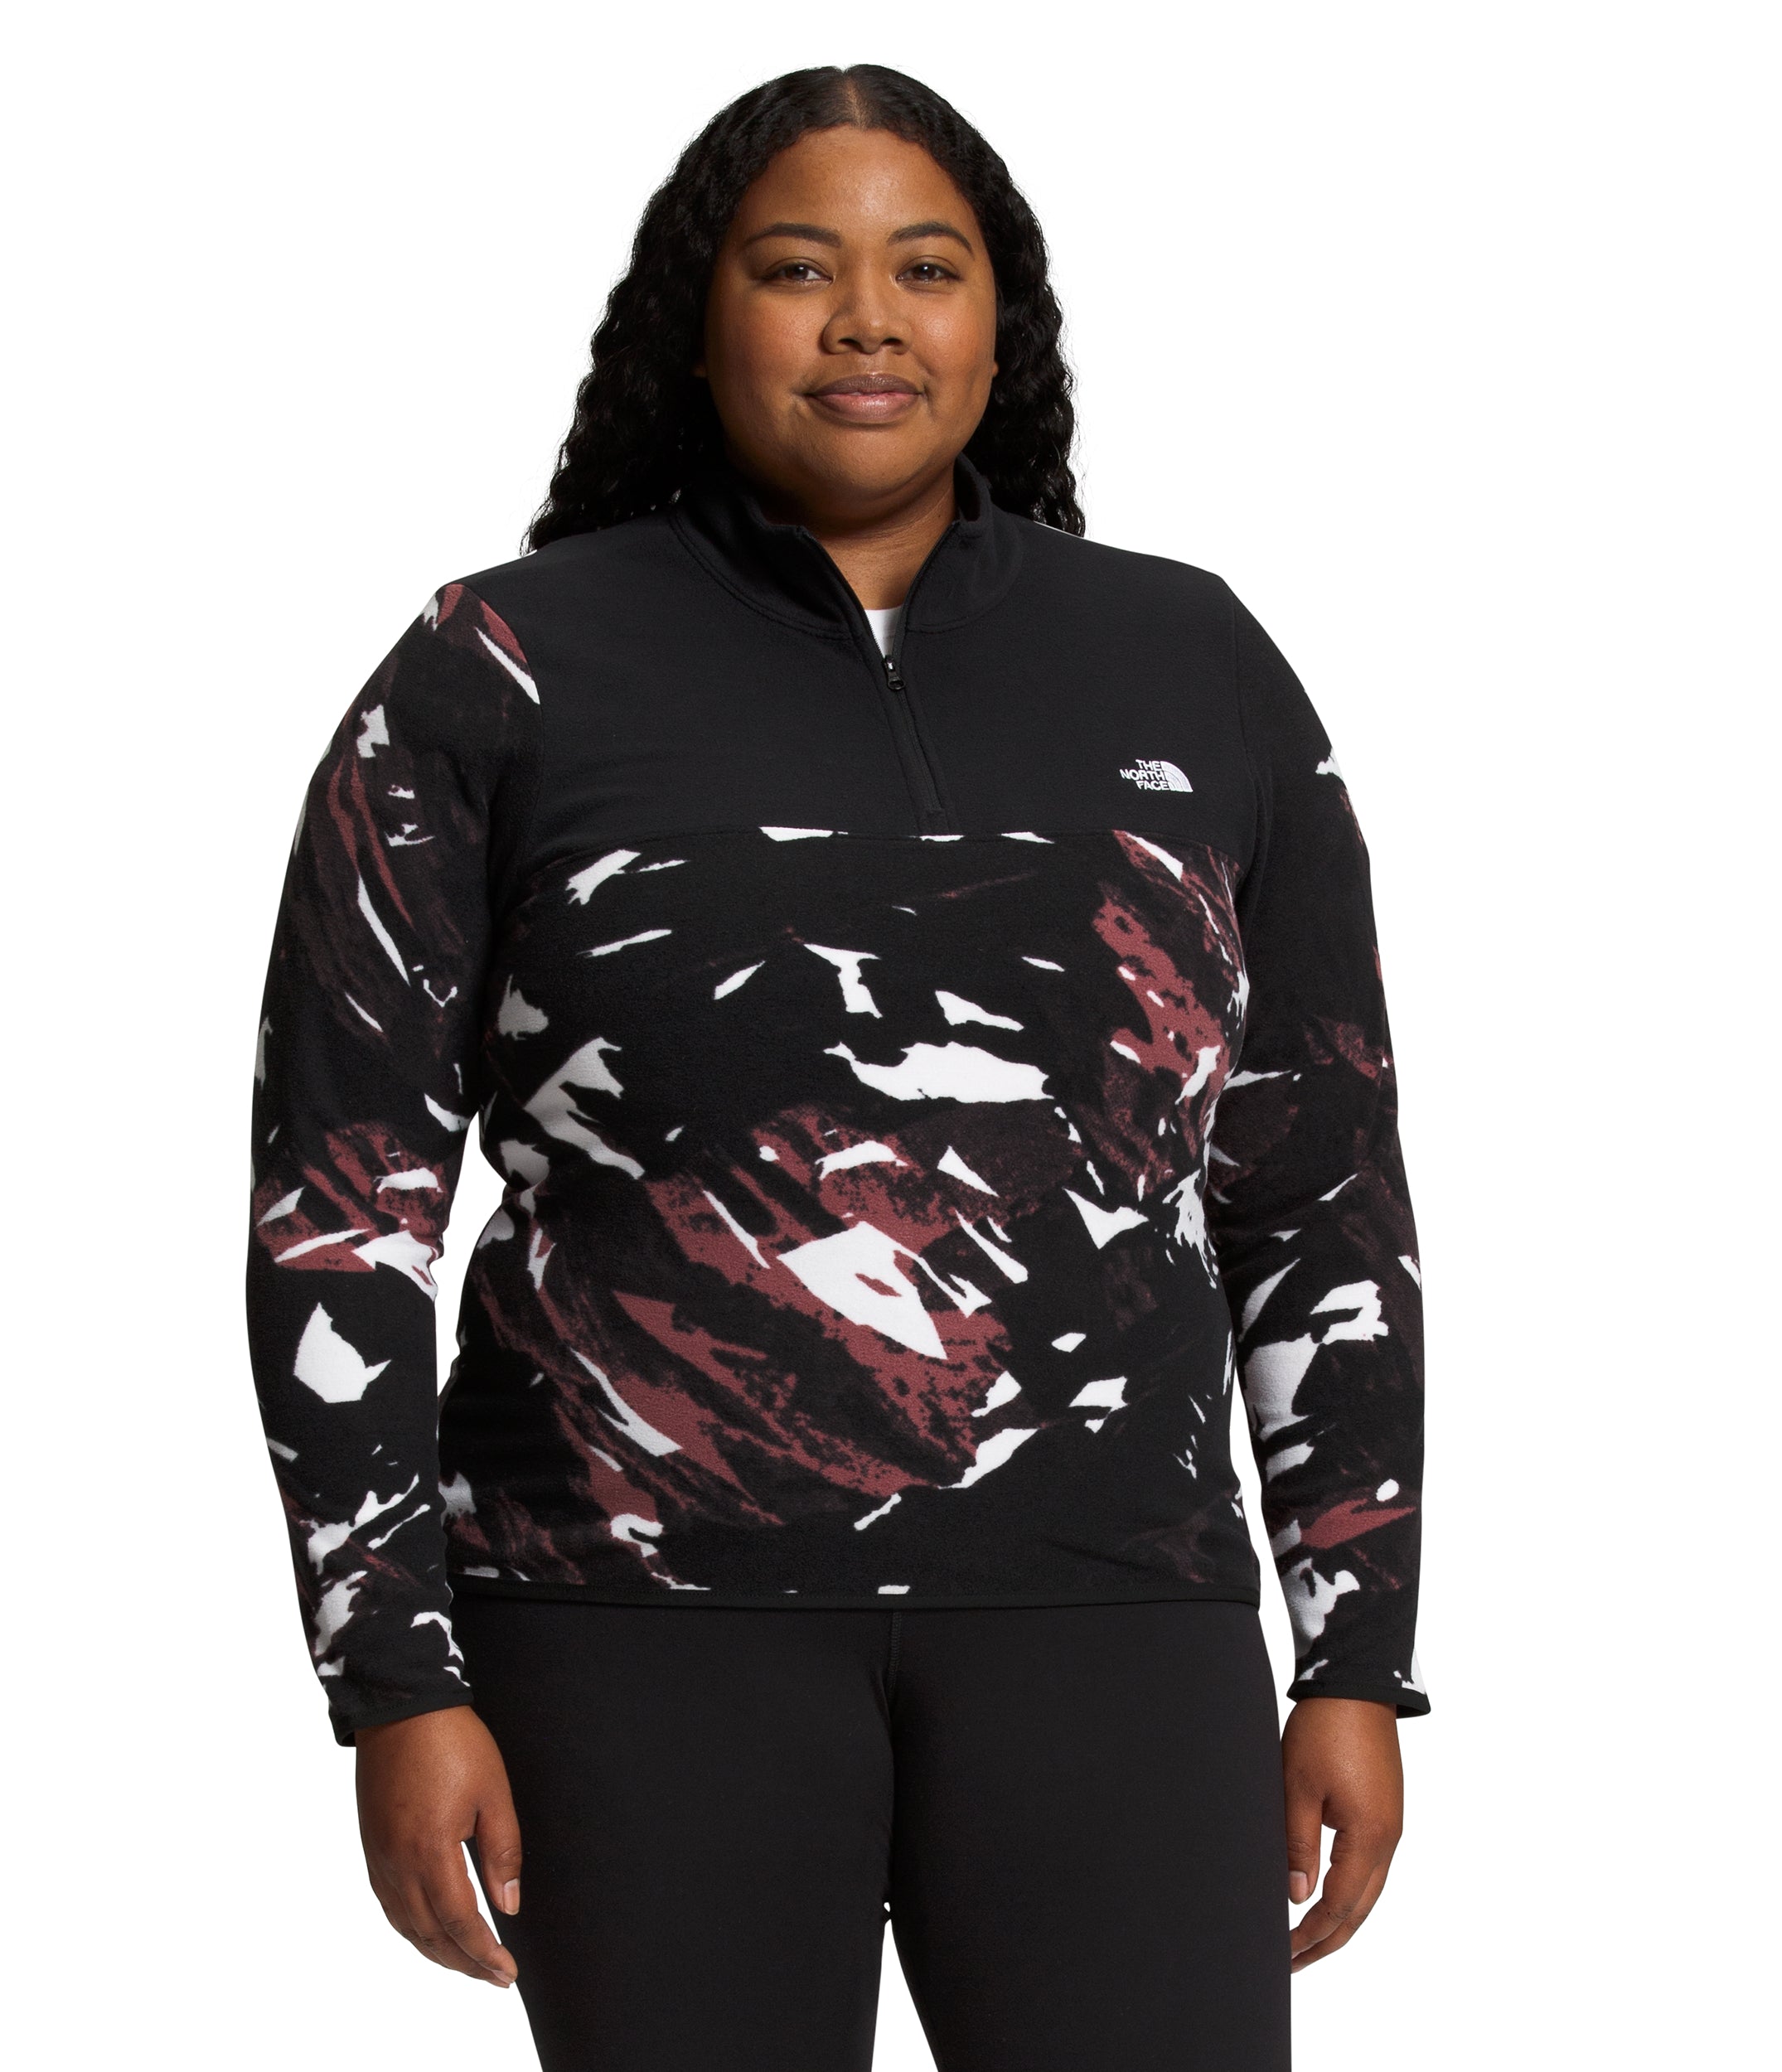 'The North Face' Printed TKA Glacier 1/4 Zip Fleece - Wild Ginger (Ext. Sizes)